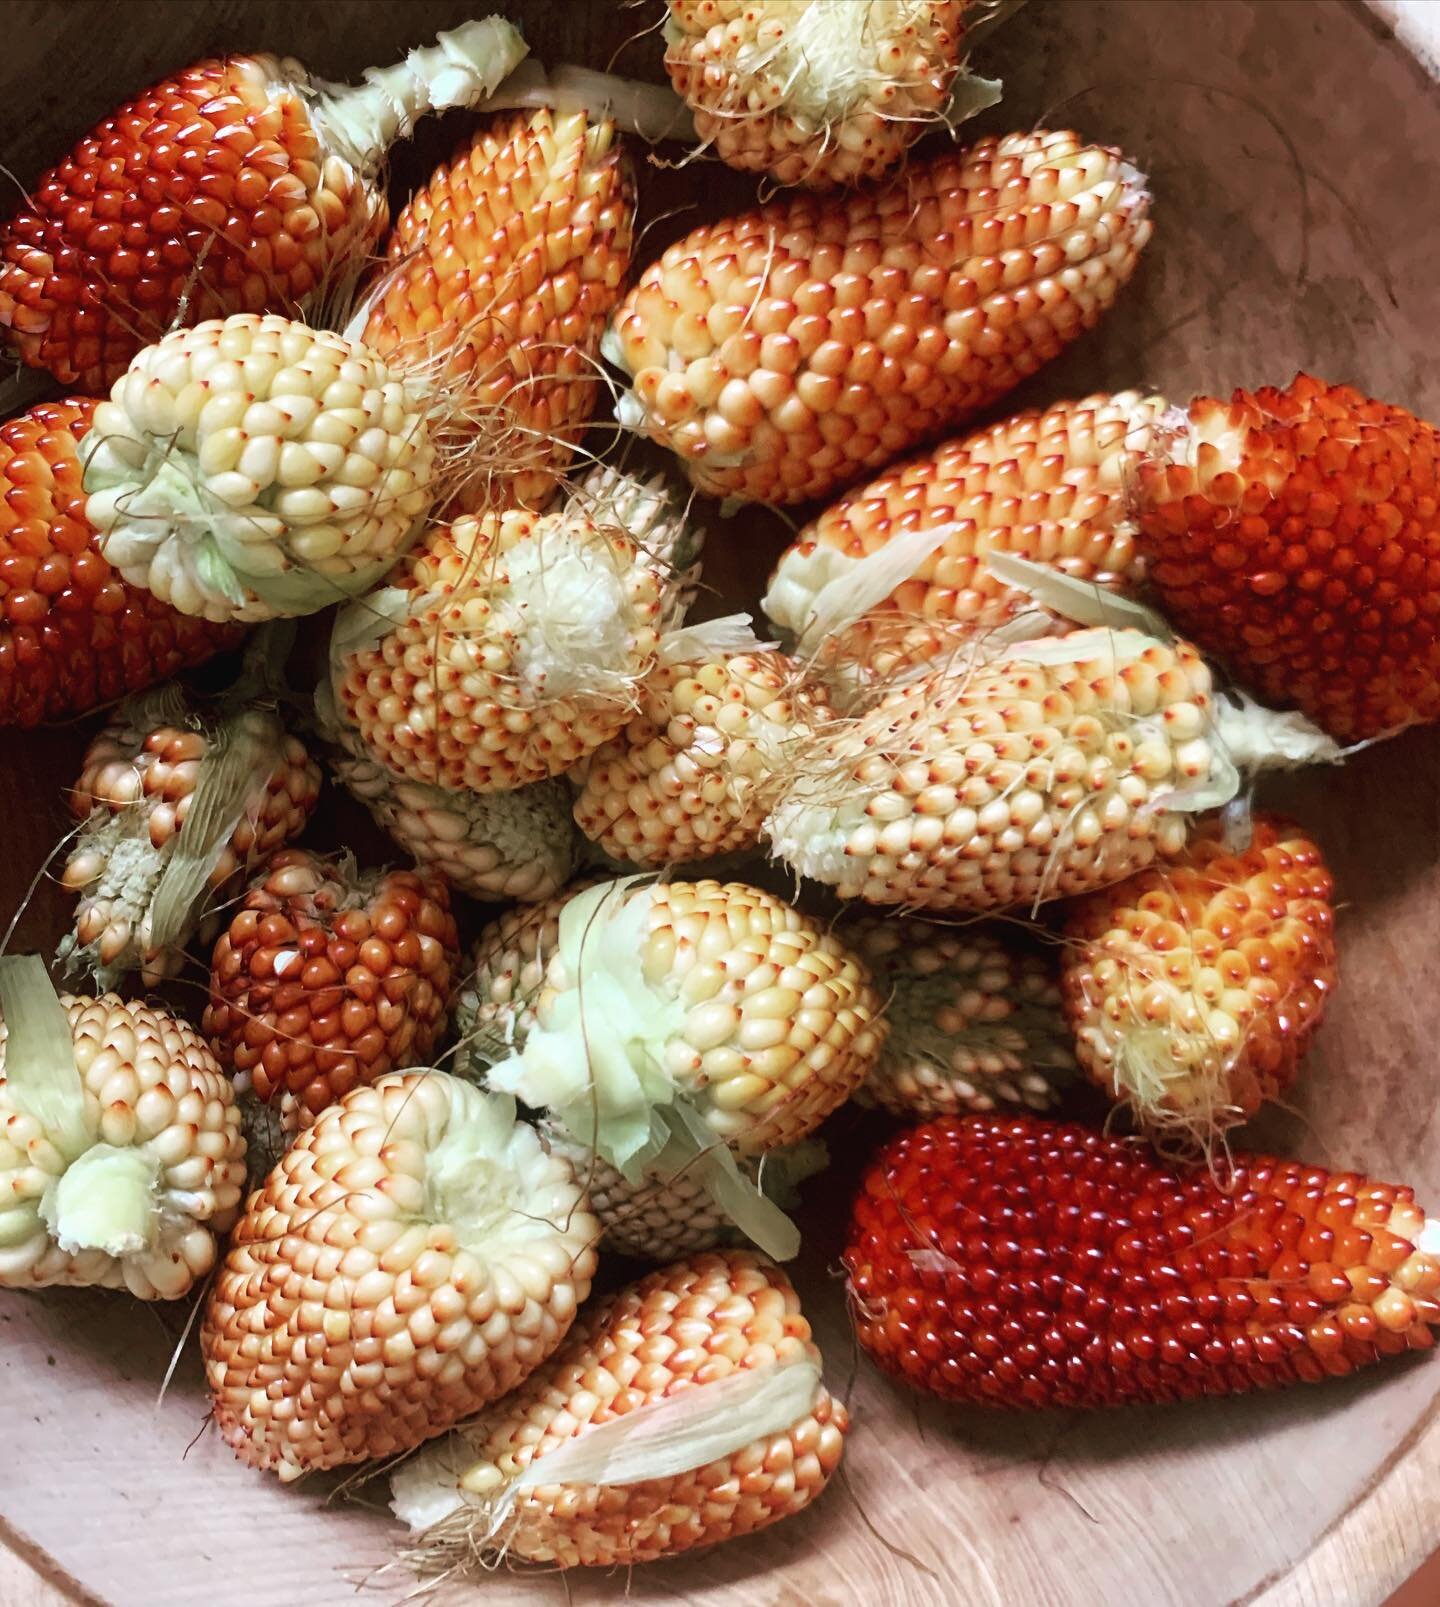 My &ldquo;just for fun&rdquo; crop of #strawberrypopcorn harvest. Can wait to try it and I&rsquo;ll definitely be planting it again next year! 🍿 #gardenadventures